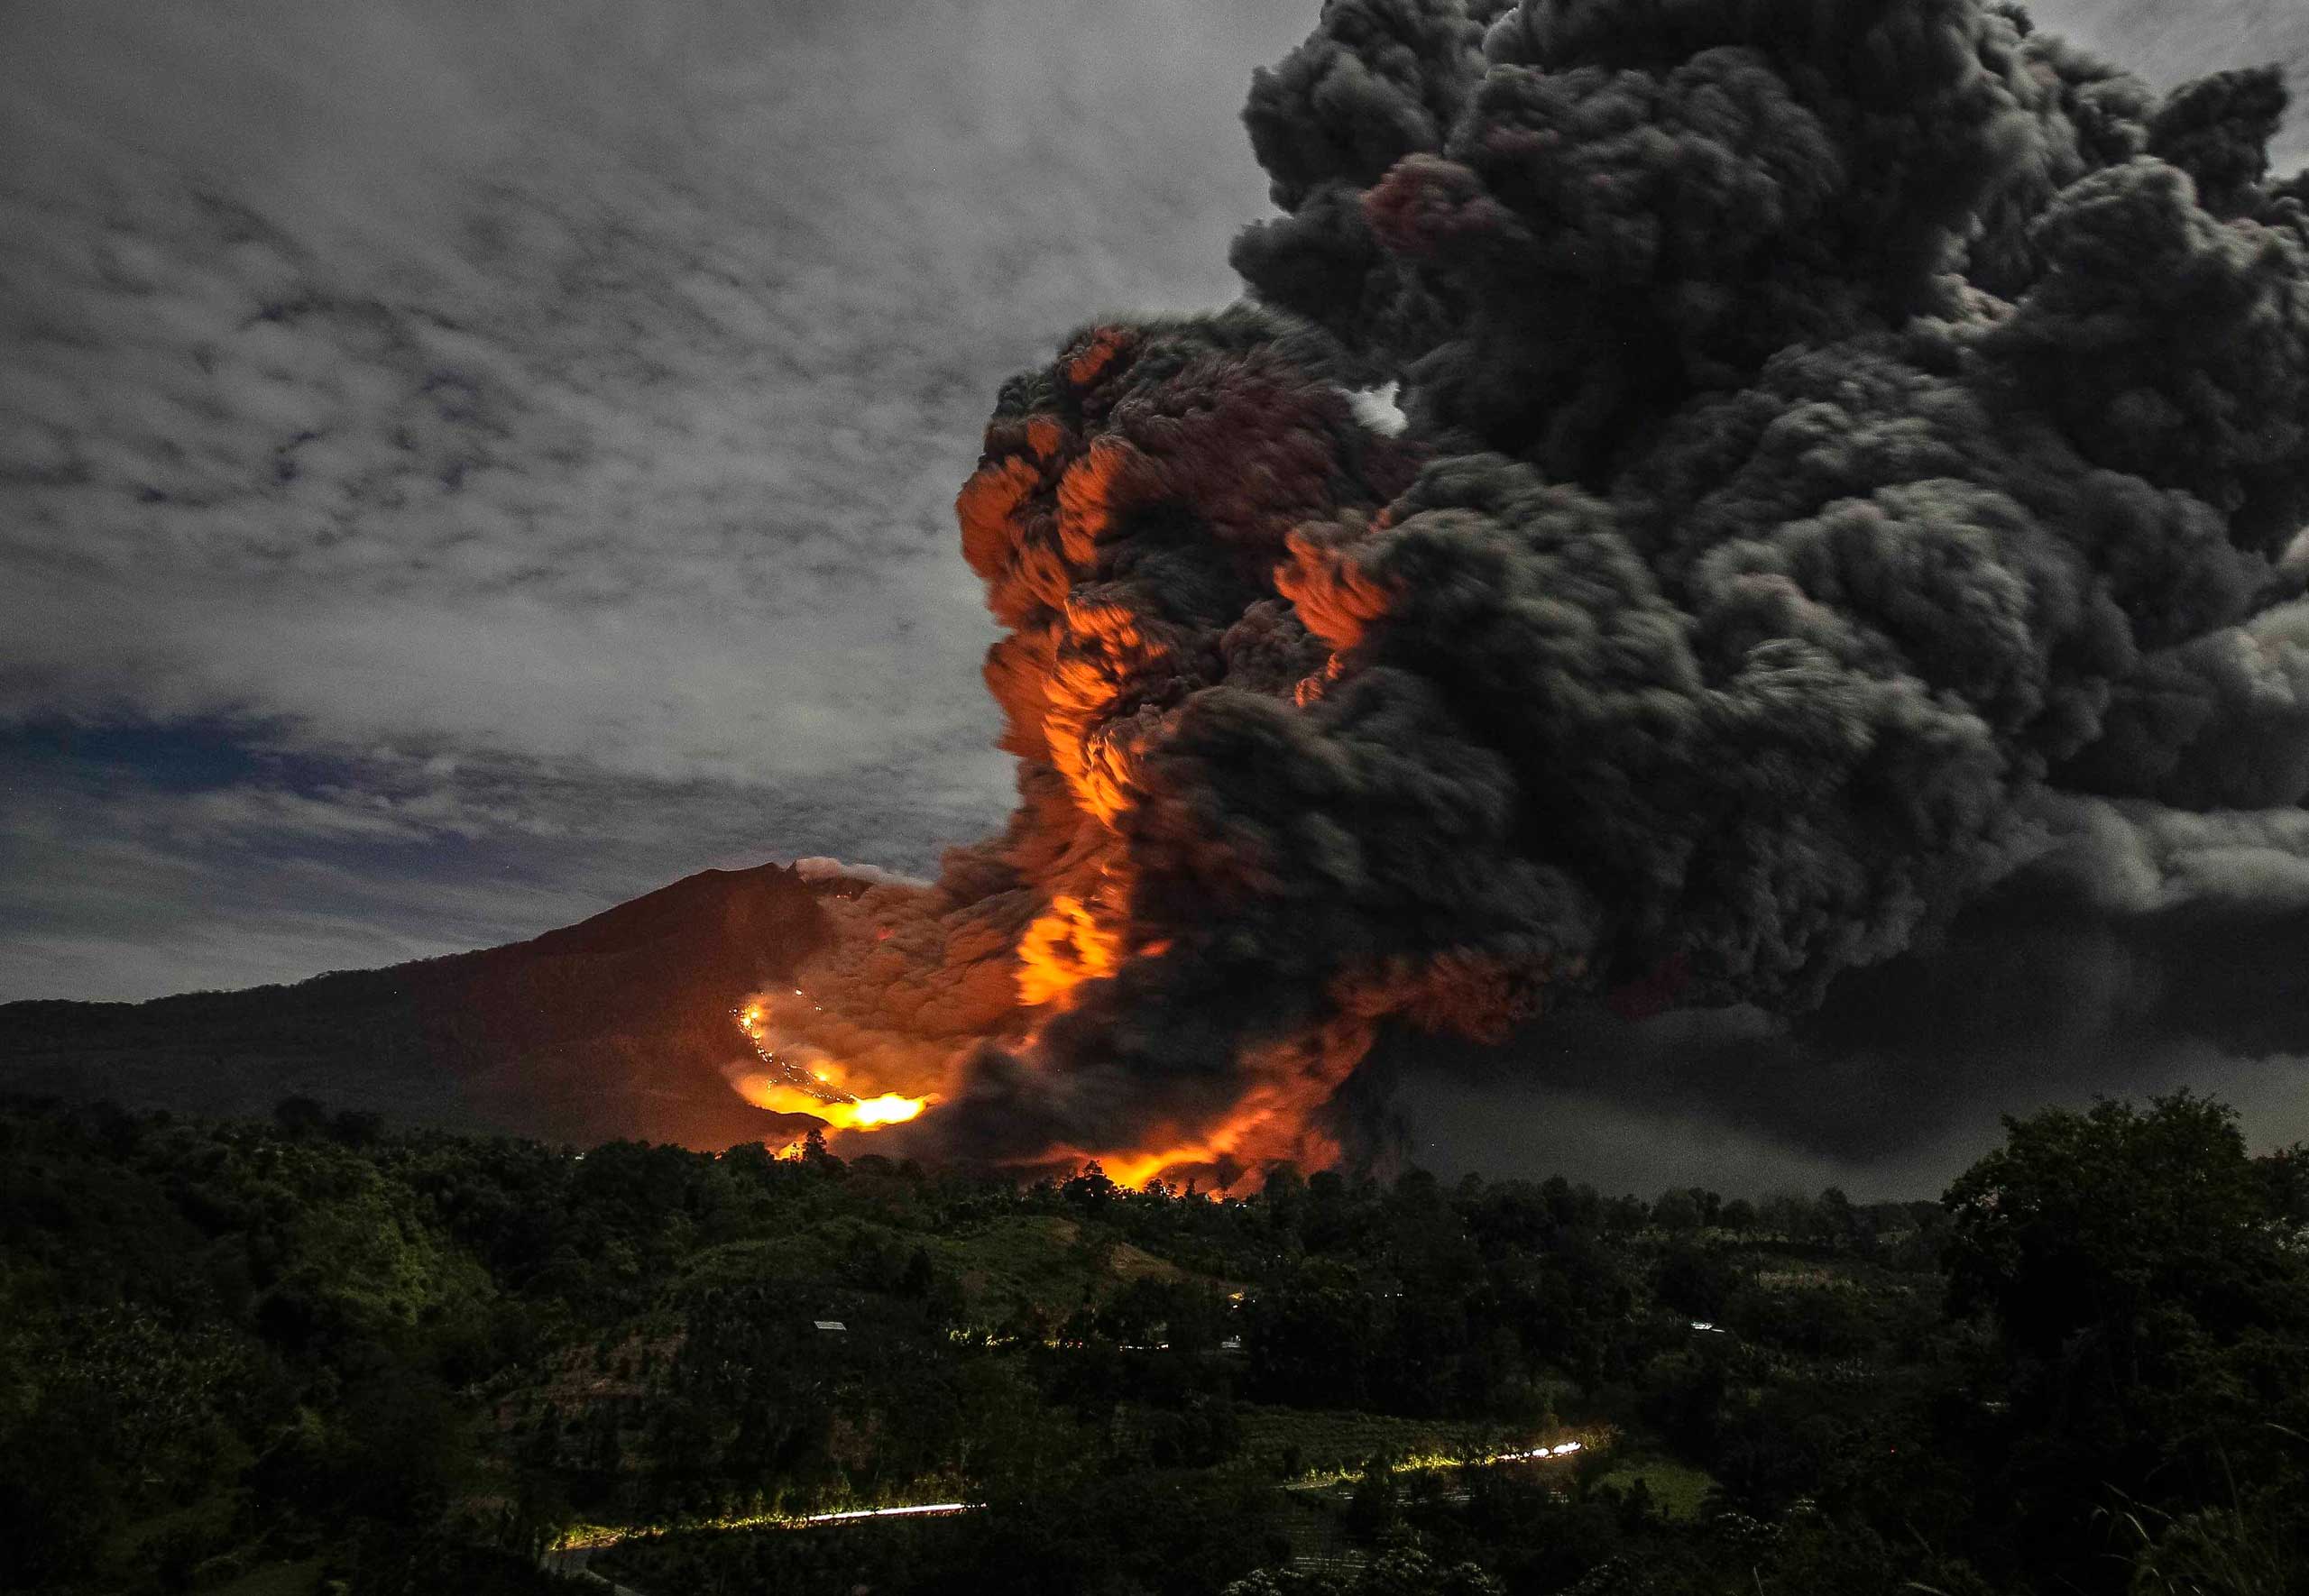 Mount Sinabung volcano erupts, as seen from Karo in Sumatra, Indonesia on Oct. 8, 2014.